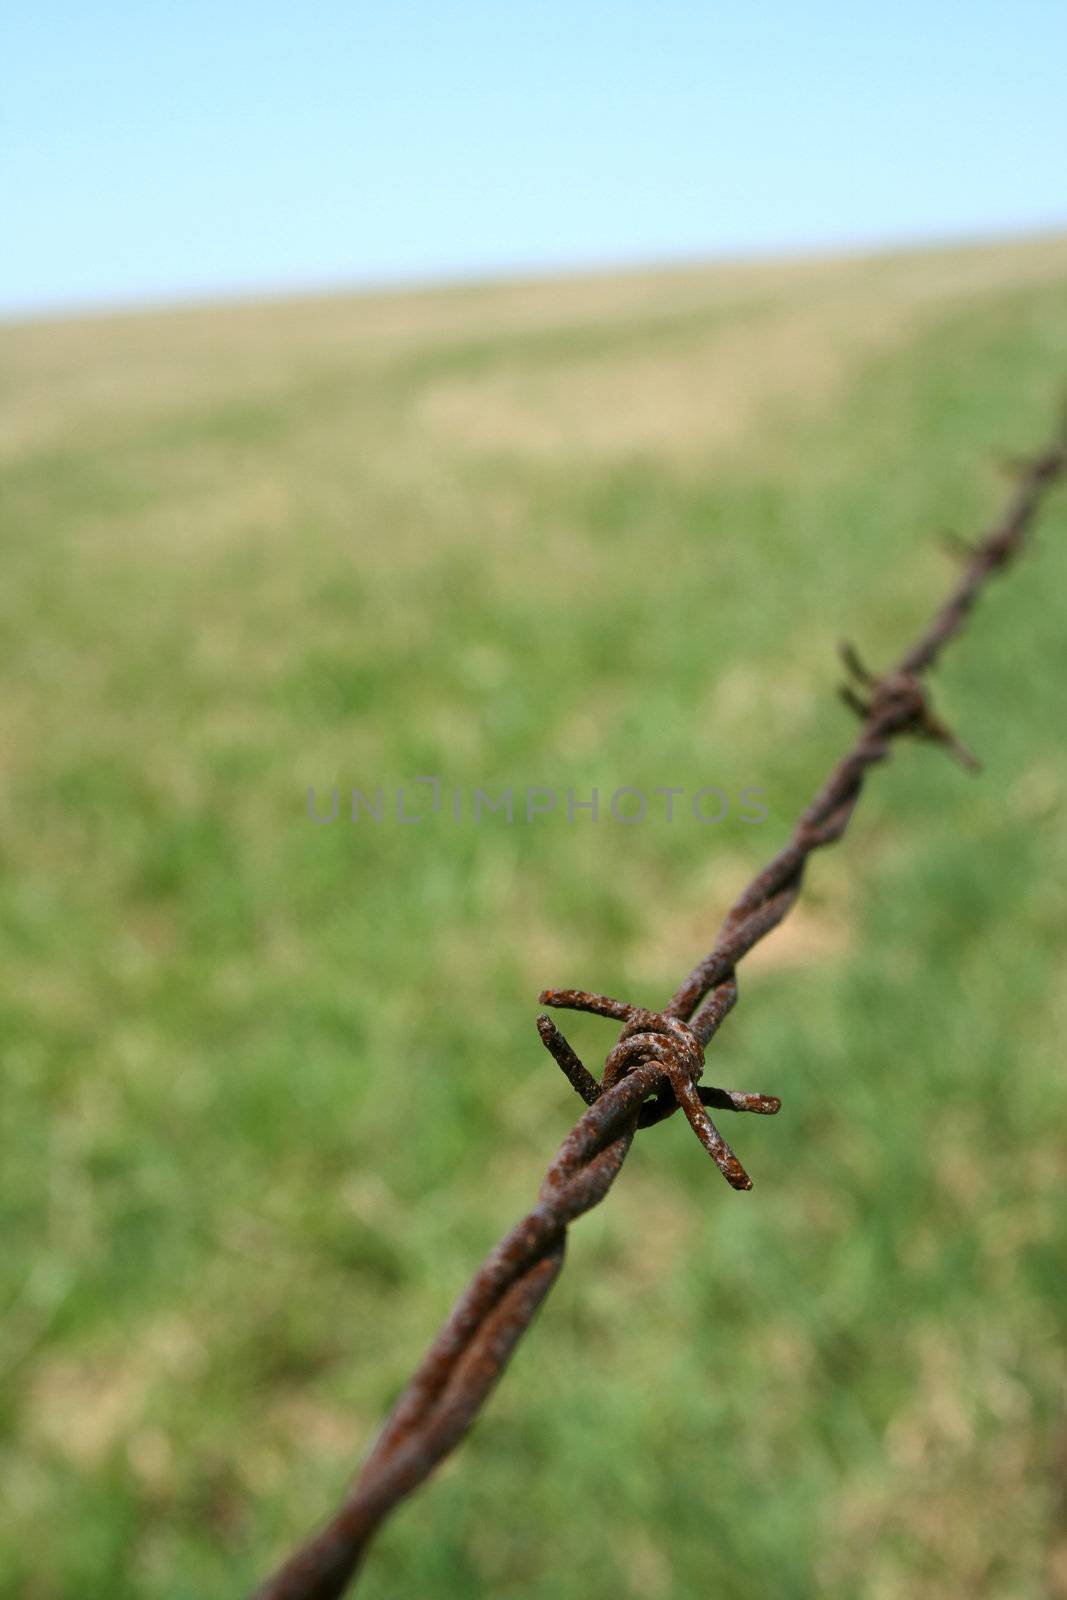 Rusty barbed wire fence in the field. Shallow depth of field.